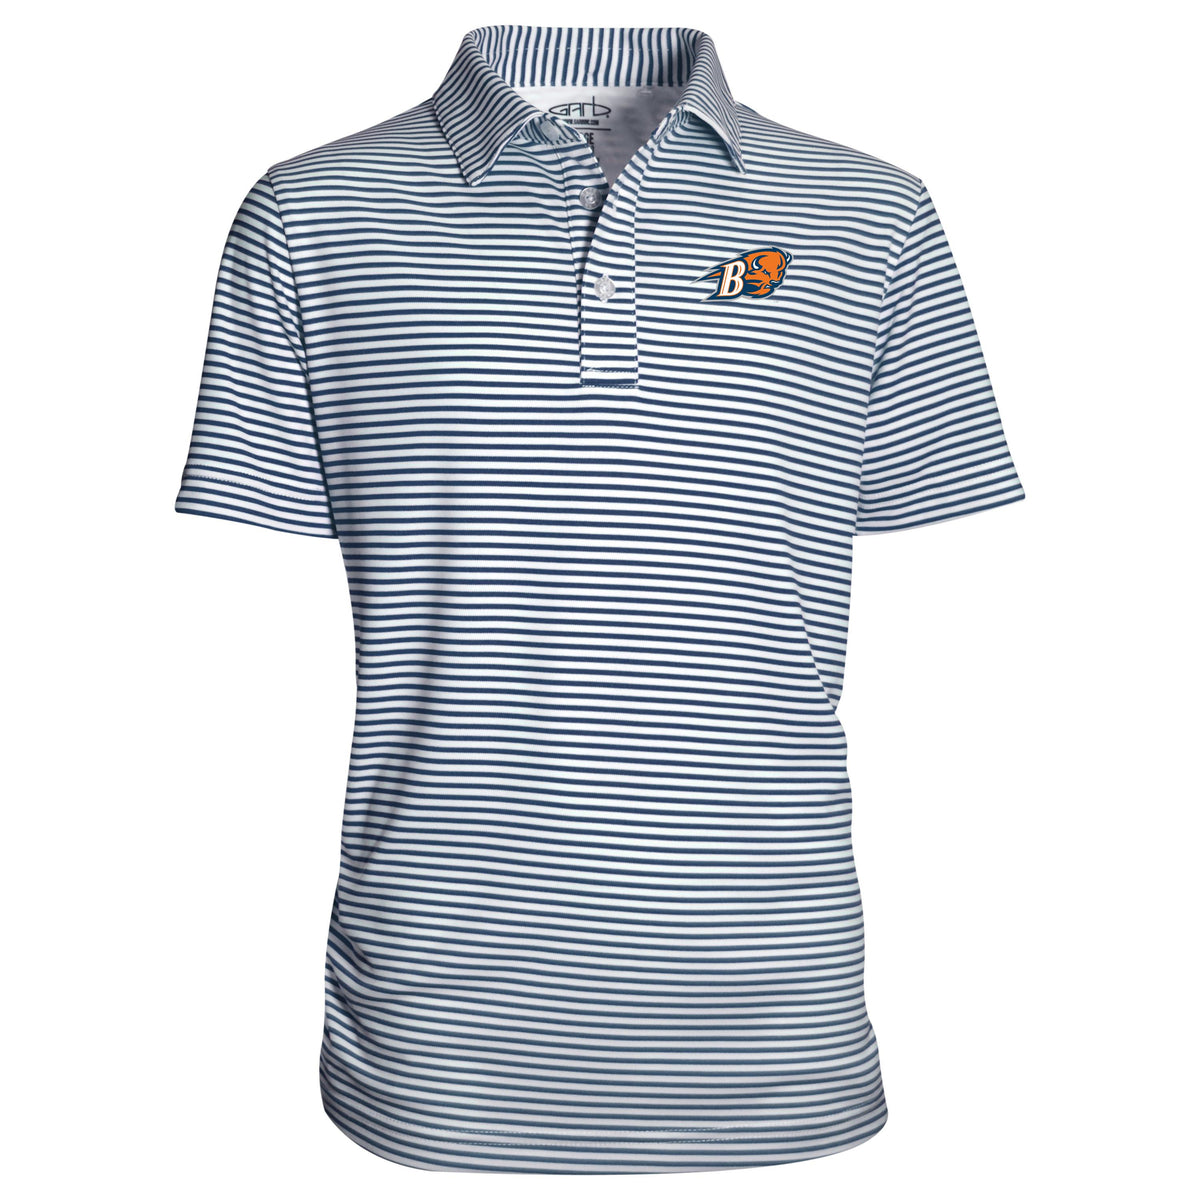 Bucknell Bison Youth Boys' Polo